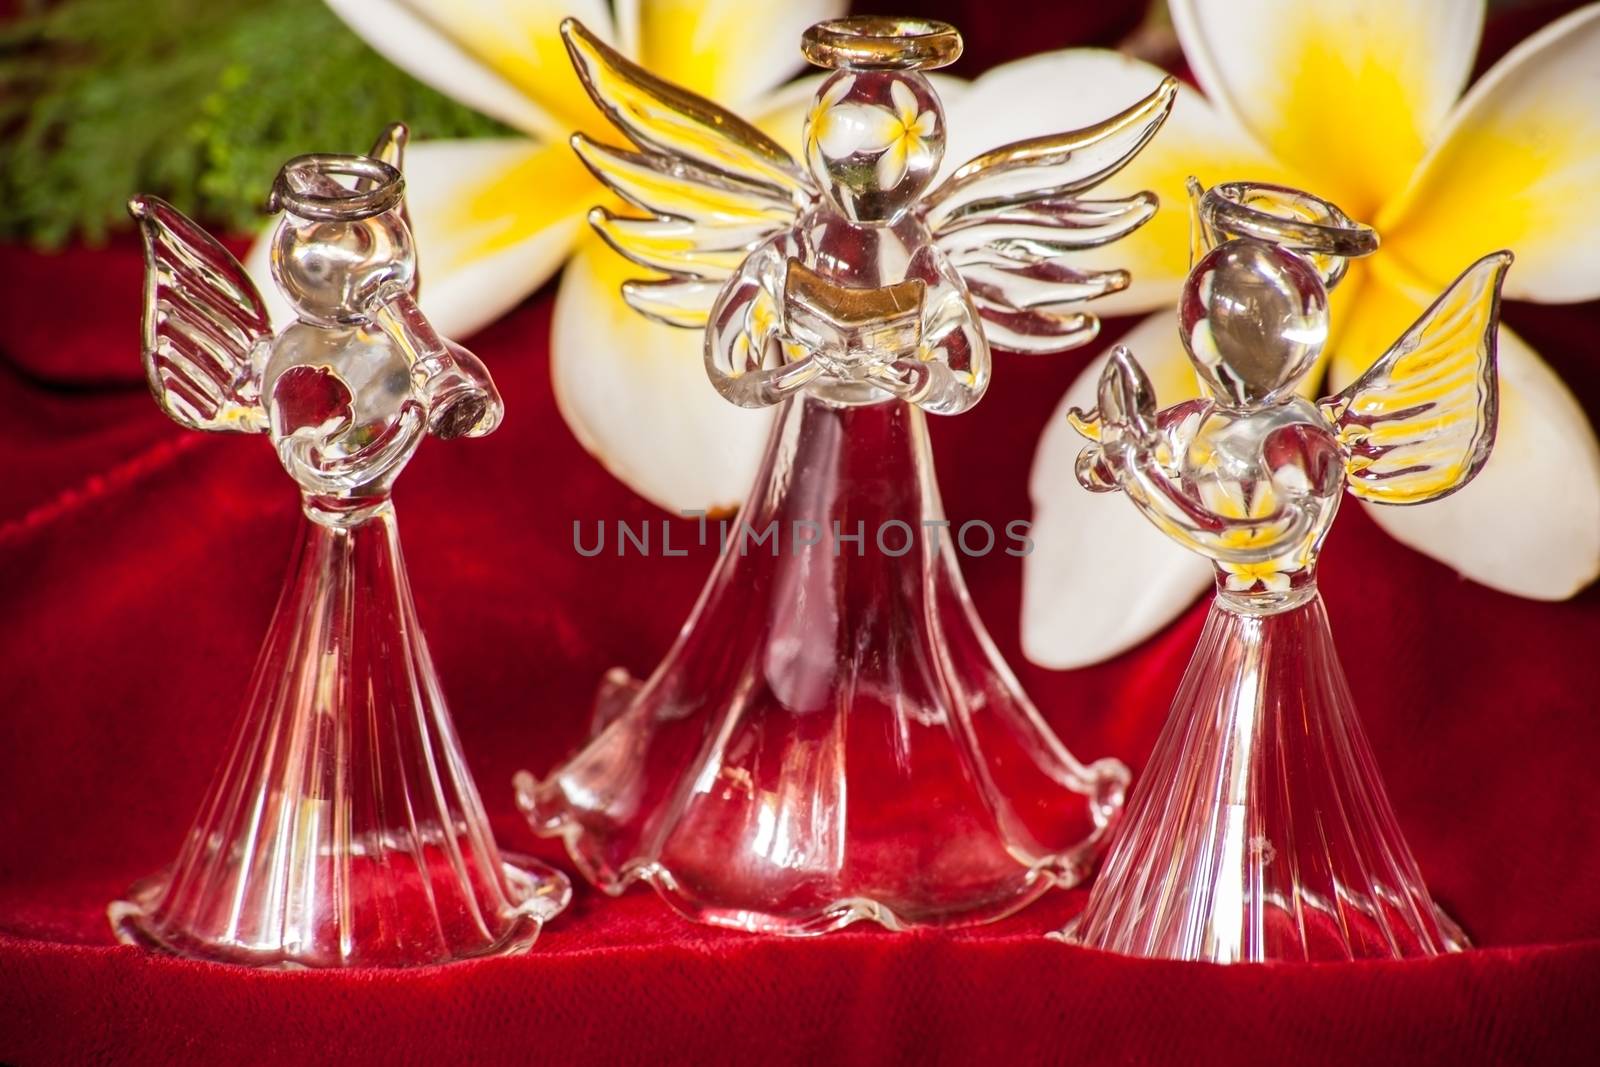 Three Glass Angels on Red Velvet reflecting the yellow flower of the Frangipani.